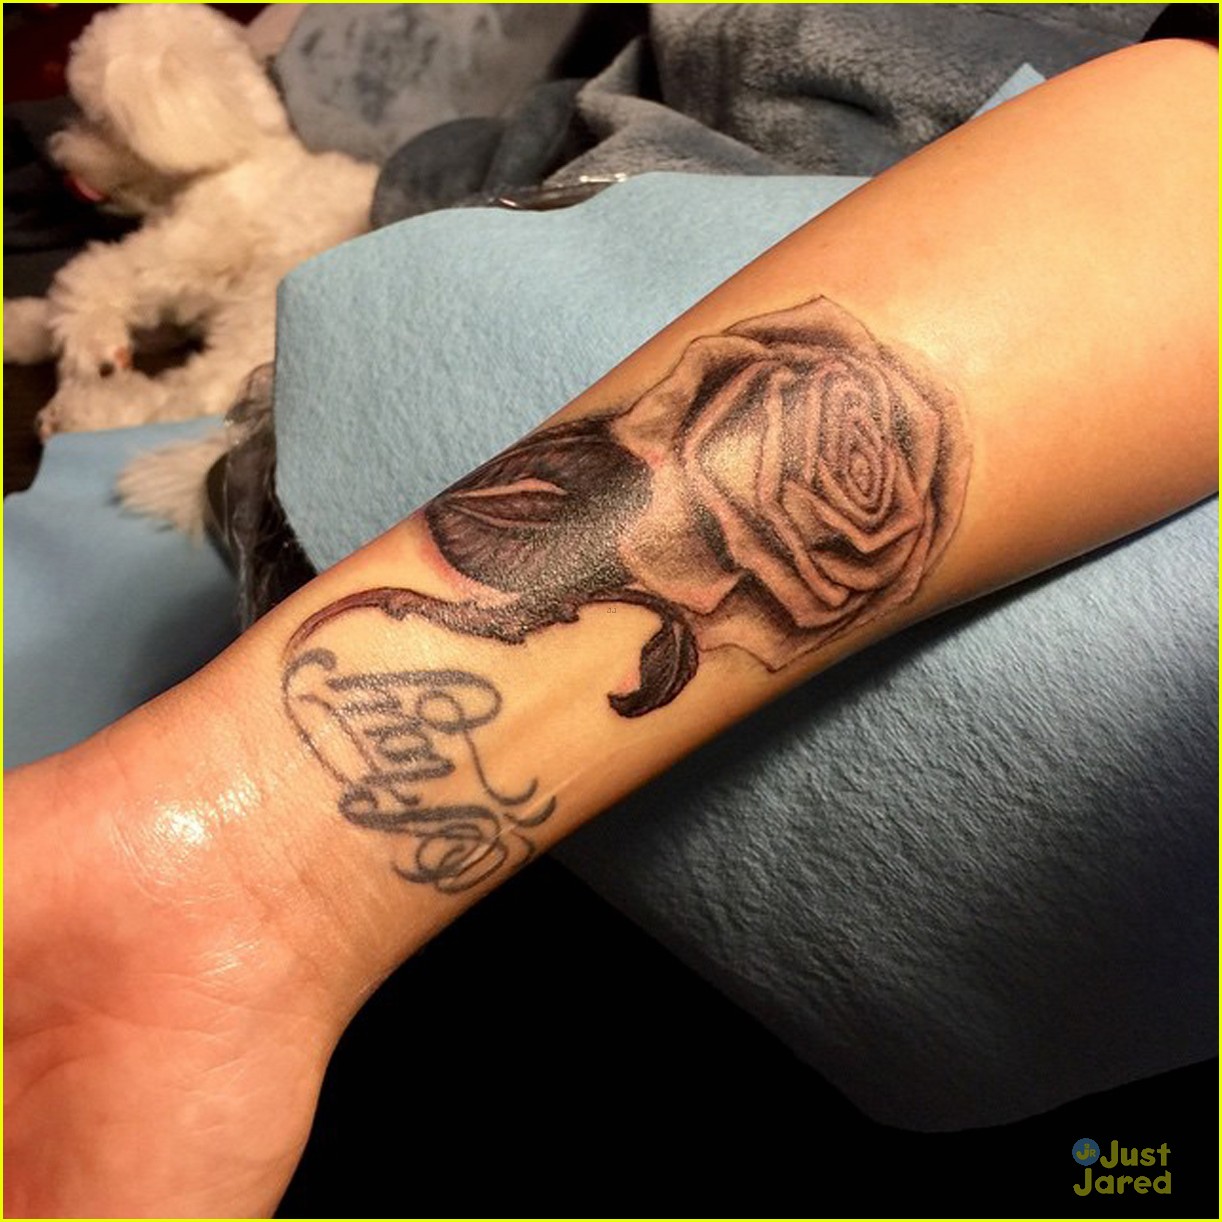 demi lovato replaces vagina tattoo with rose 02